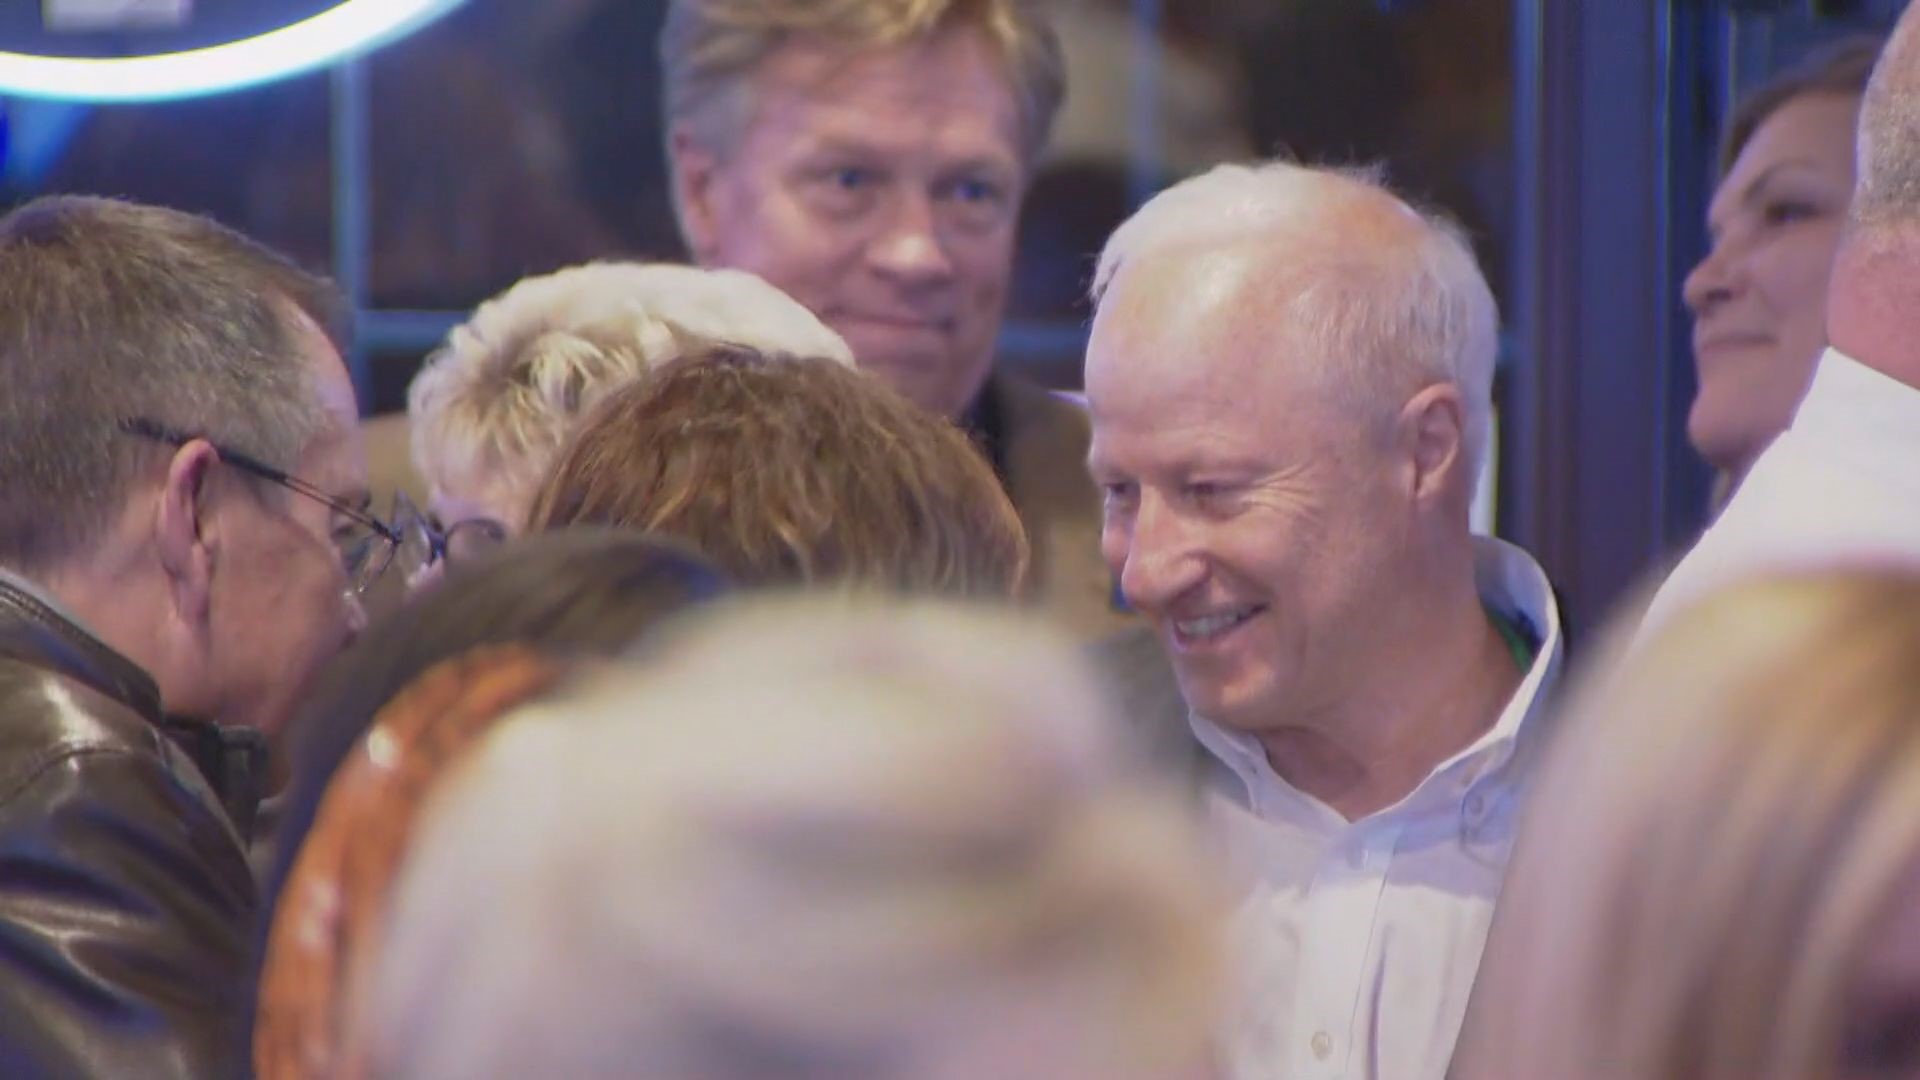 Mike Coffman appears poised to win a second term as Aurora's mayor. The incumbent faced councilmember Juan Marcano and Jeff Sanford in Tuesday's election.